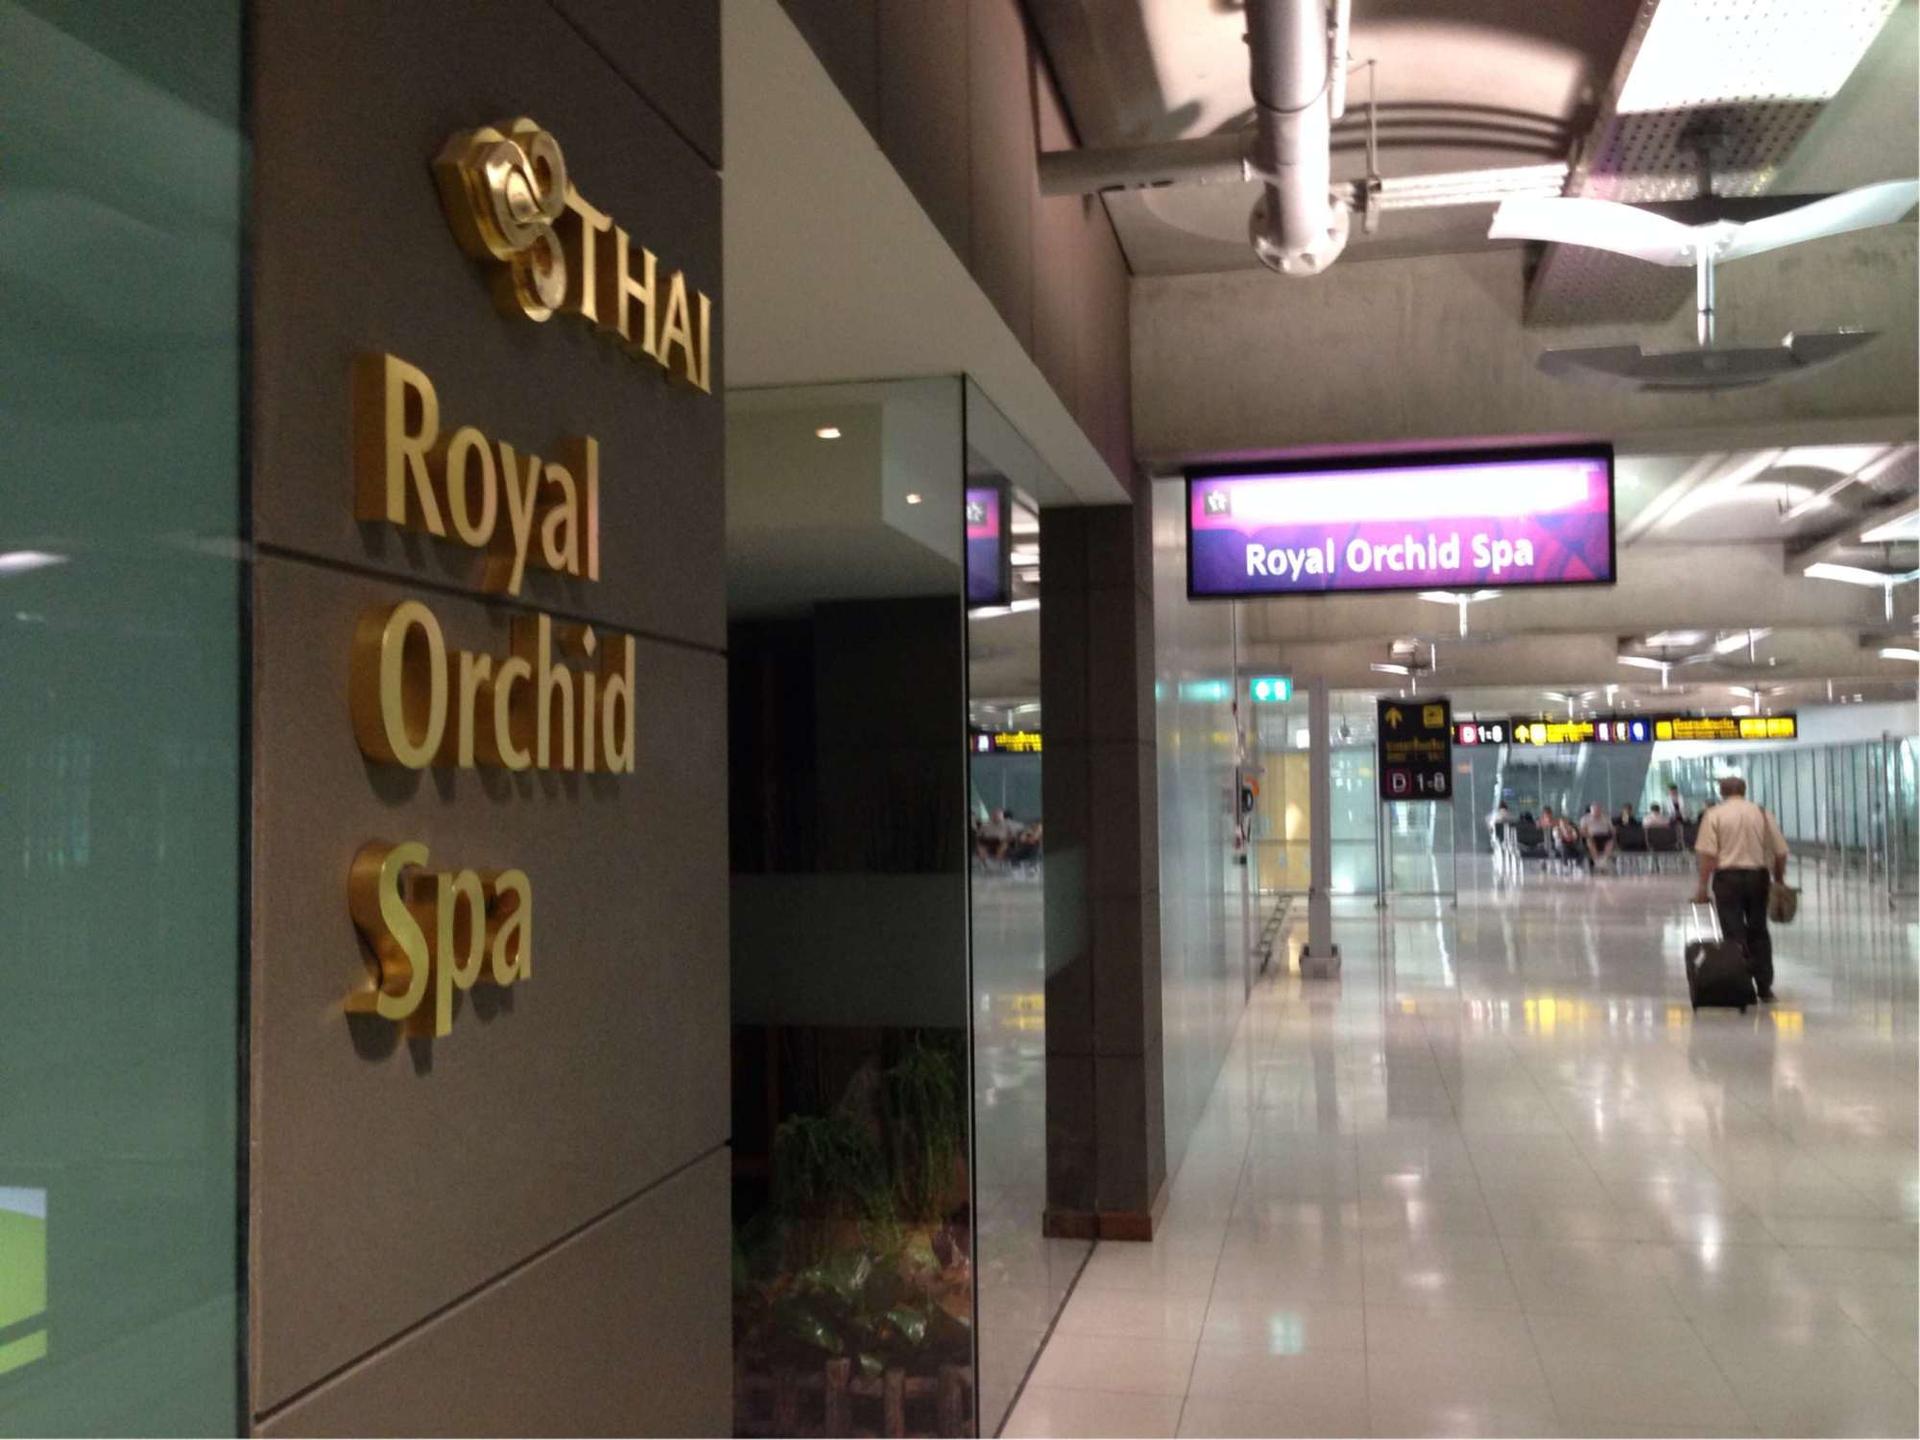 Thai Airways Royal Orchid Spa  image 10 of 25